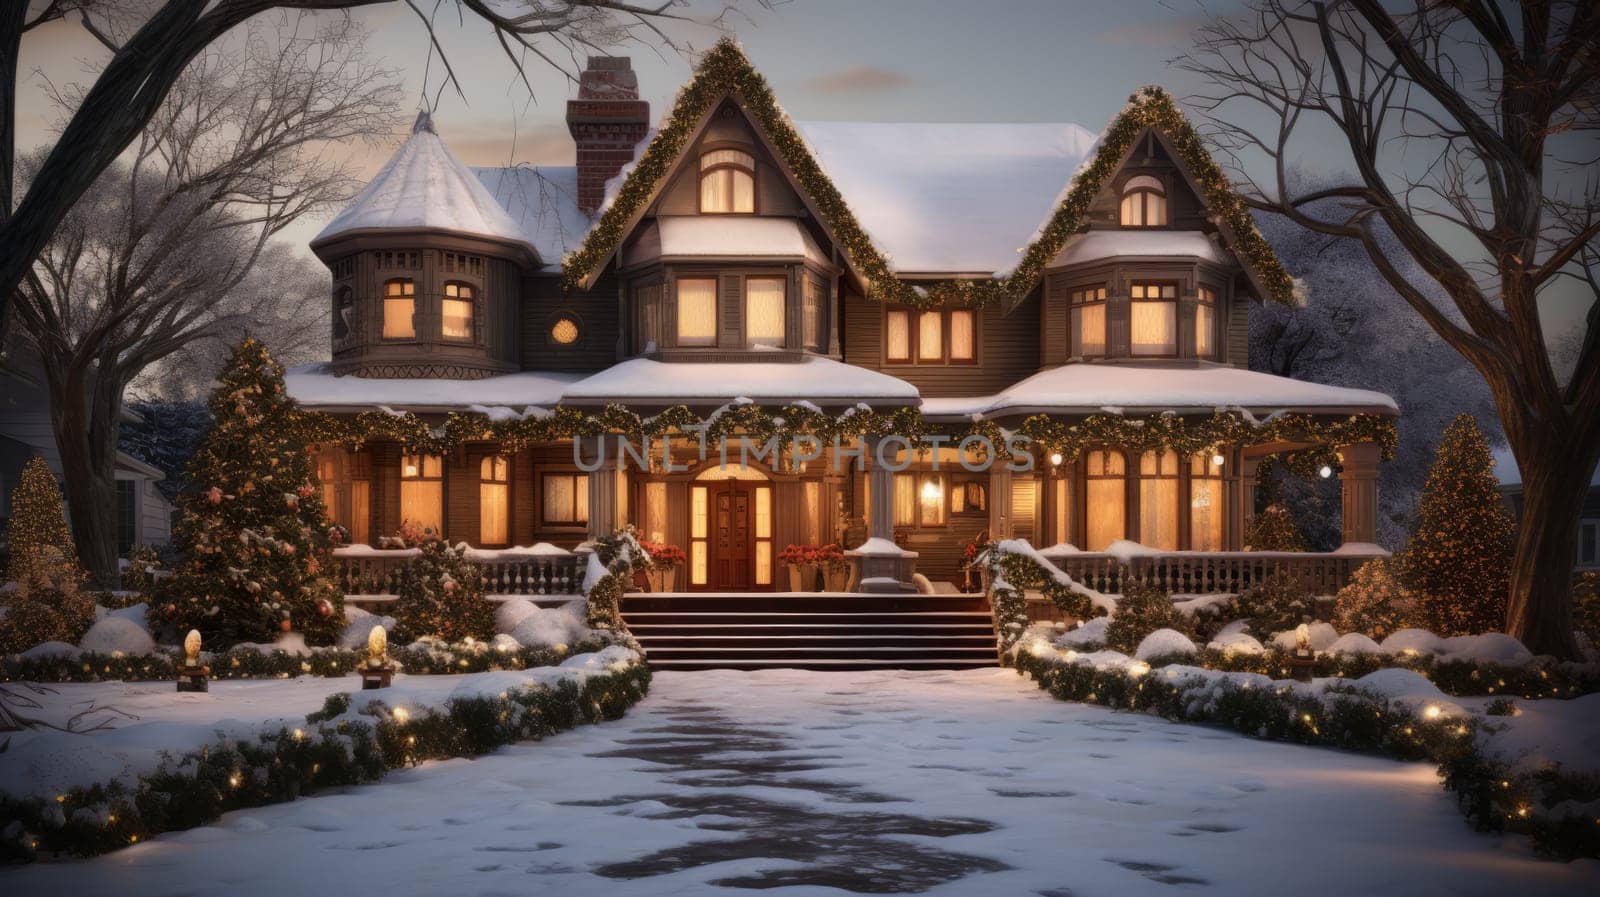 Night view of a snow-covered, beautiful wooden country house decorated for Christmas.